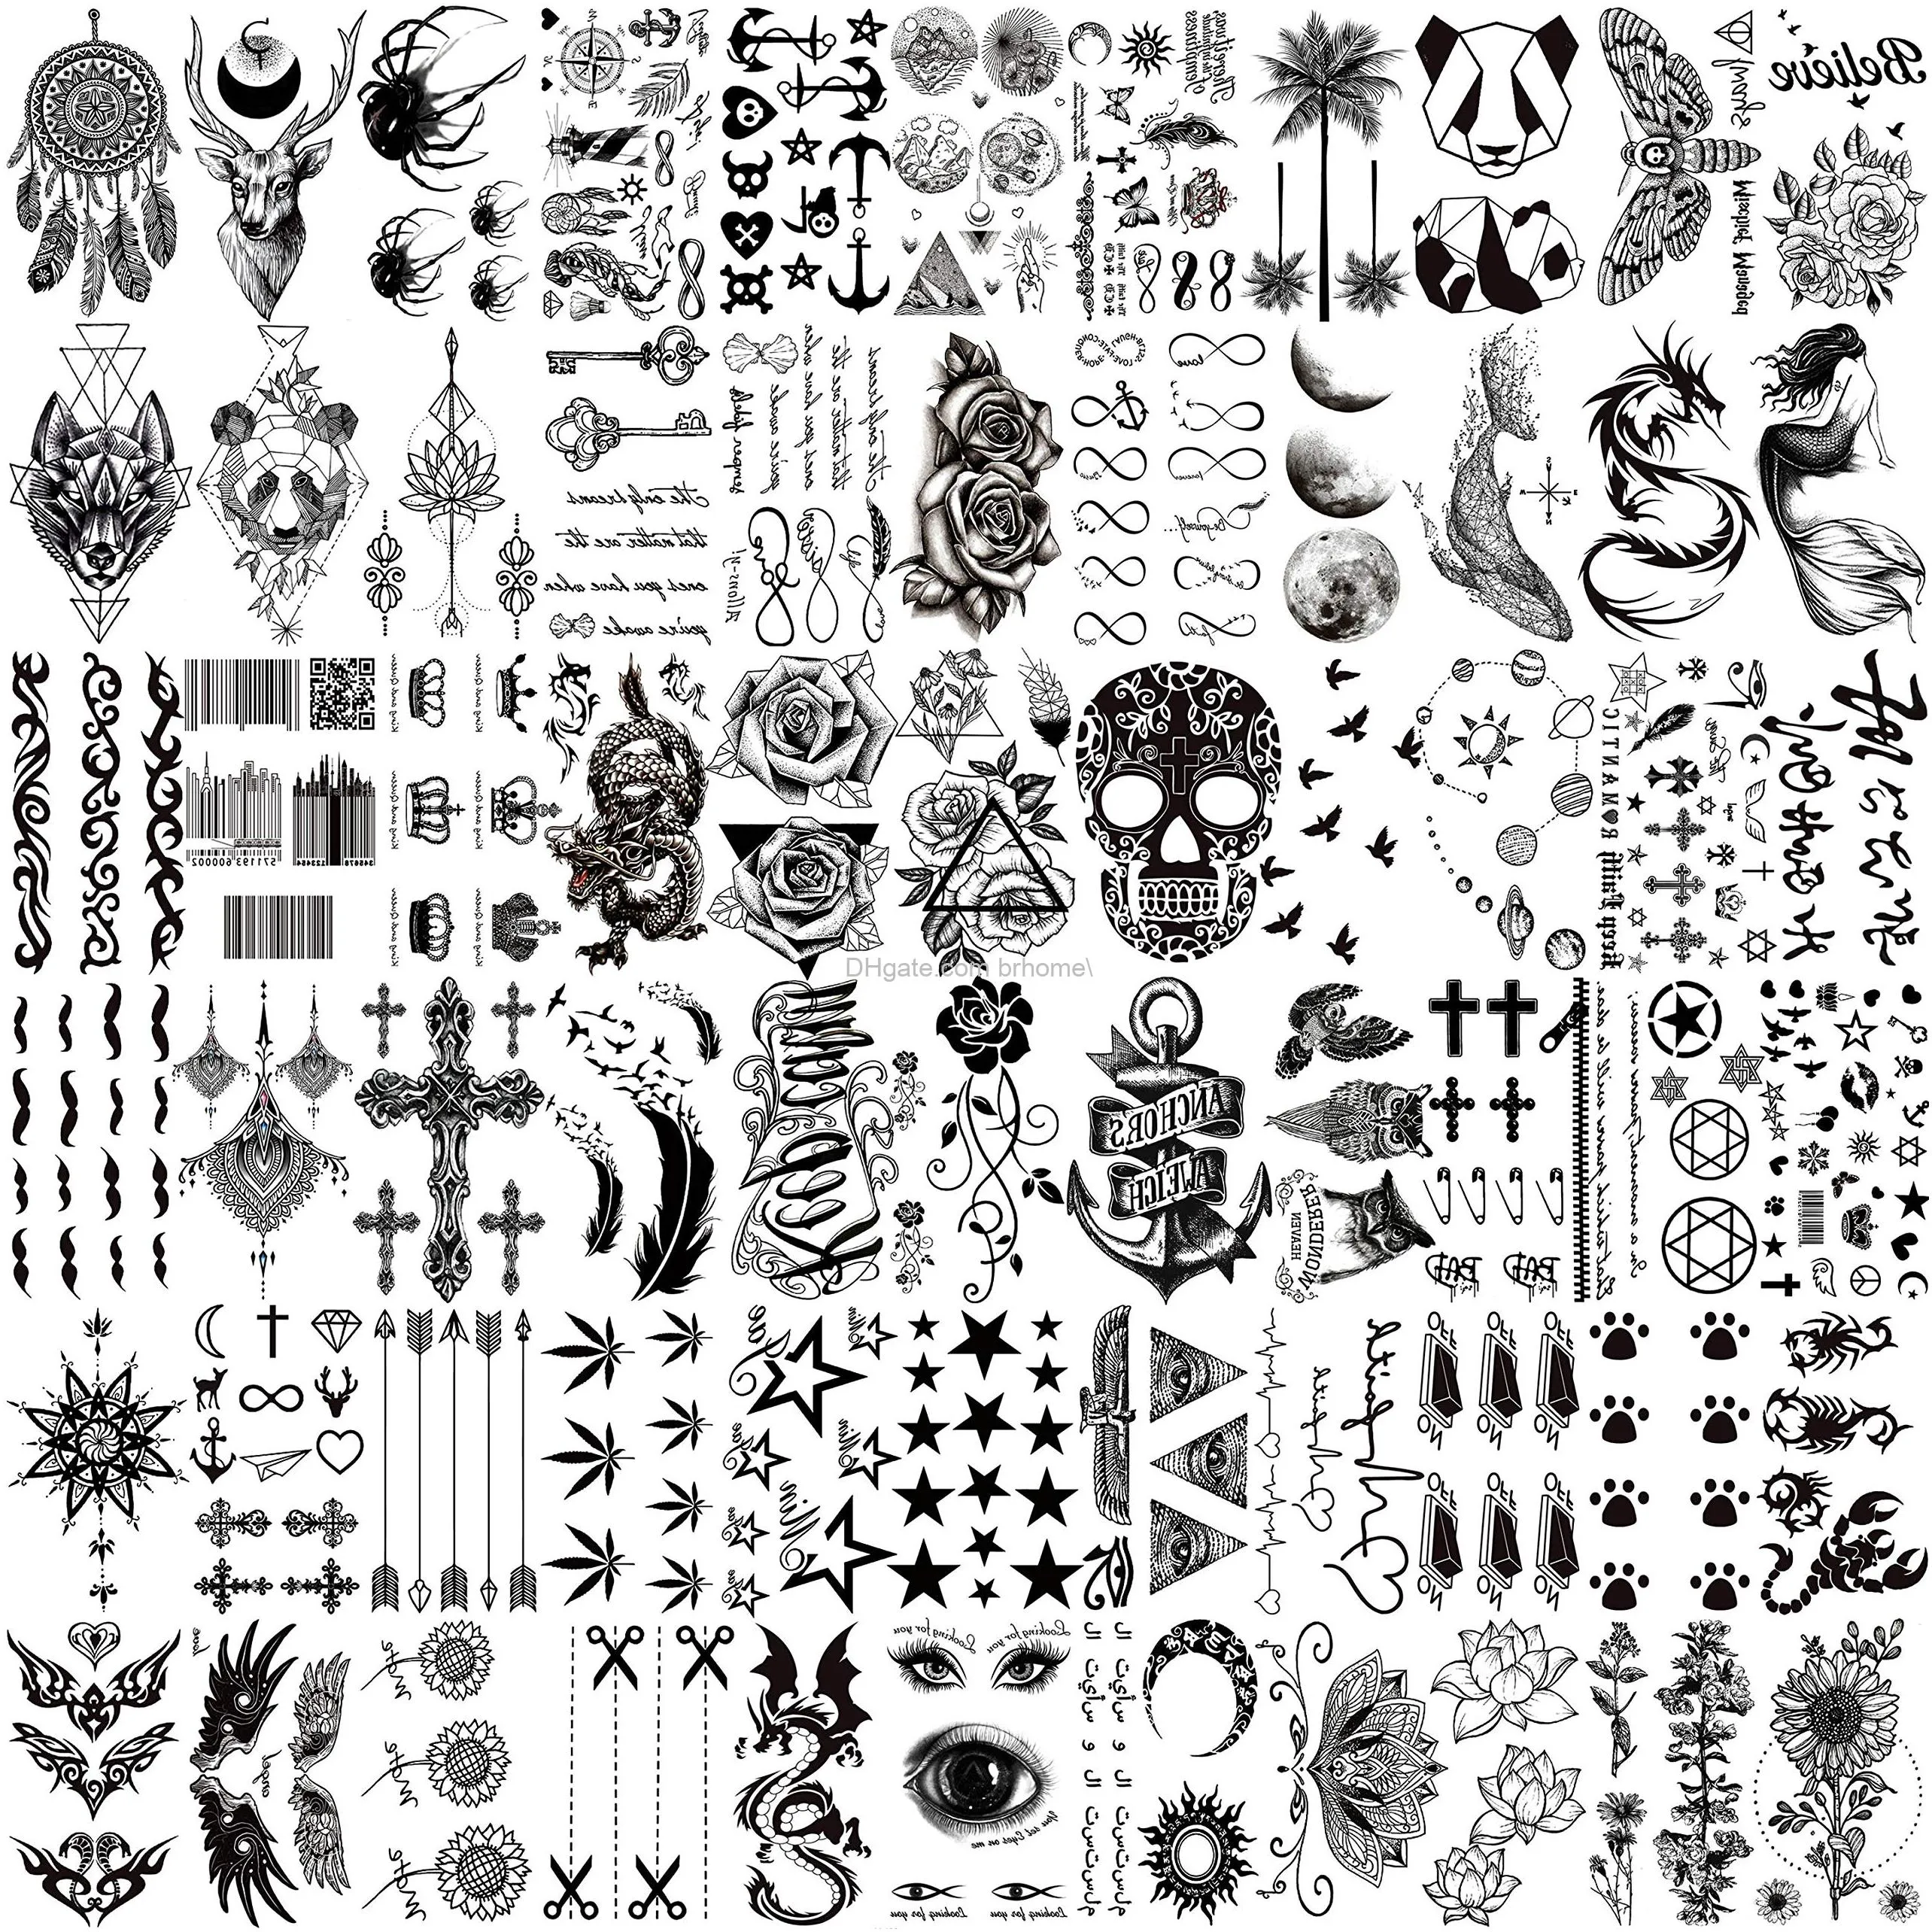 30 Sheets Fake Black Tiny Temporary Tattoo, Hands Finger Words Tattoo  Sticker for Men Women, Body Art on Face Arm Neck Shoulder Clavicle  Waterproof : Amazon.in: Beauty